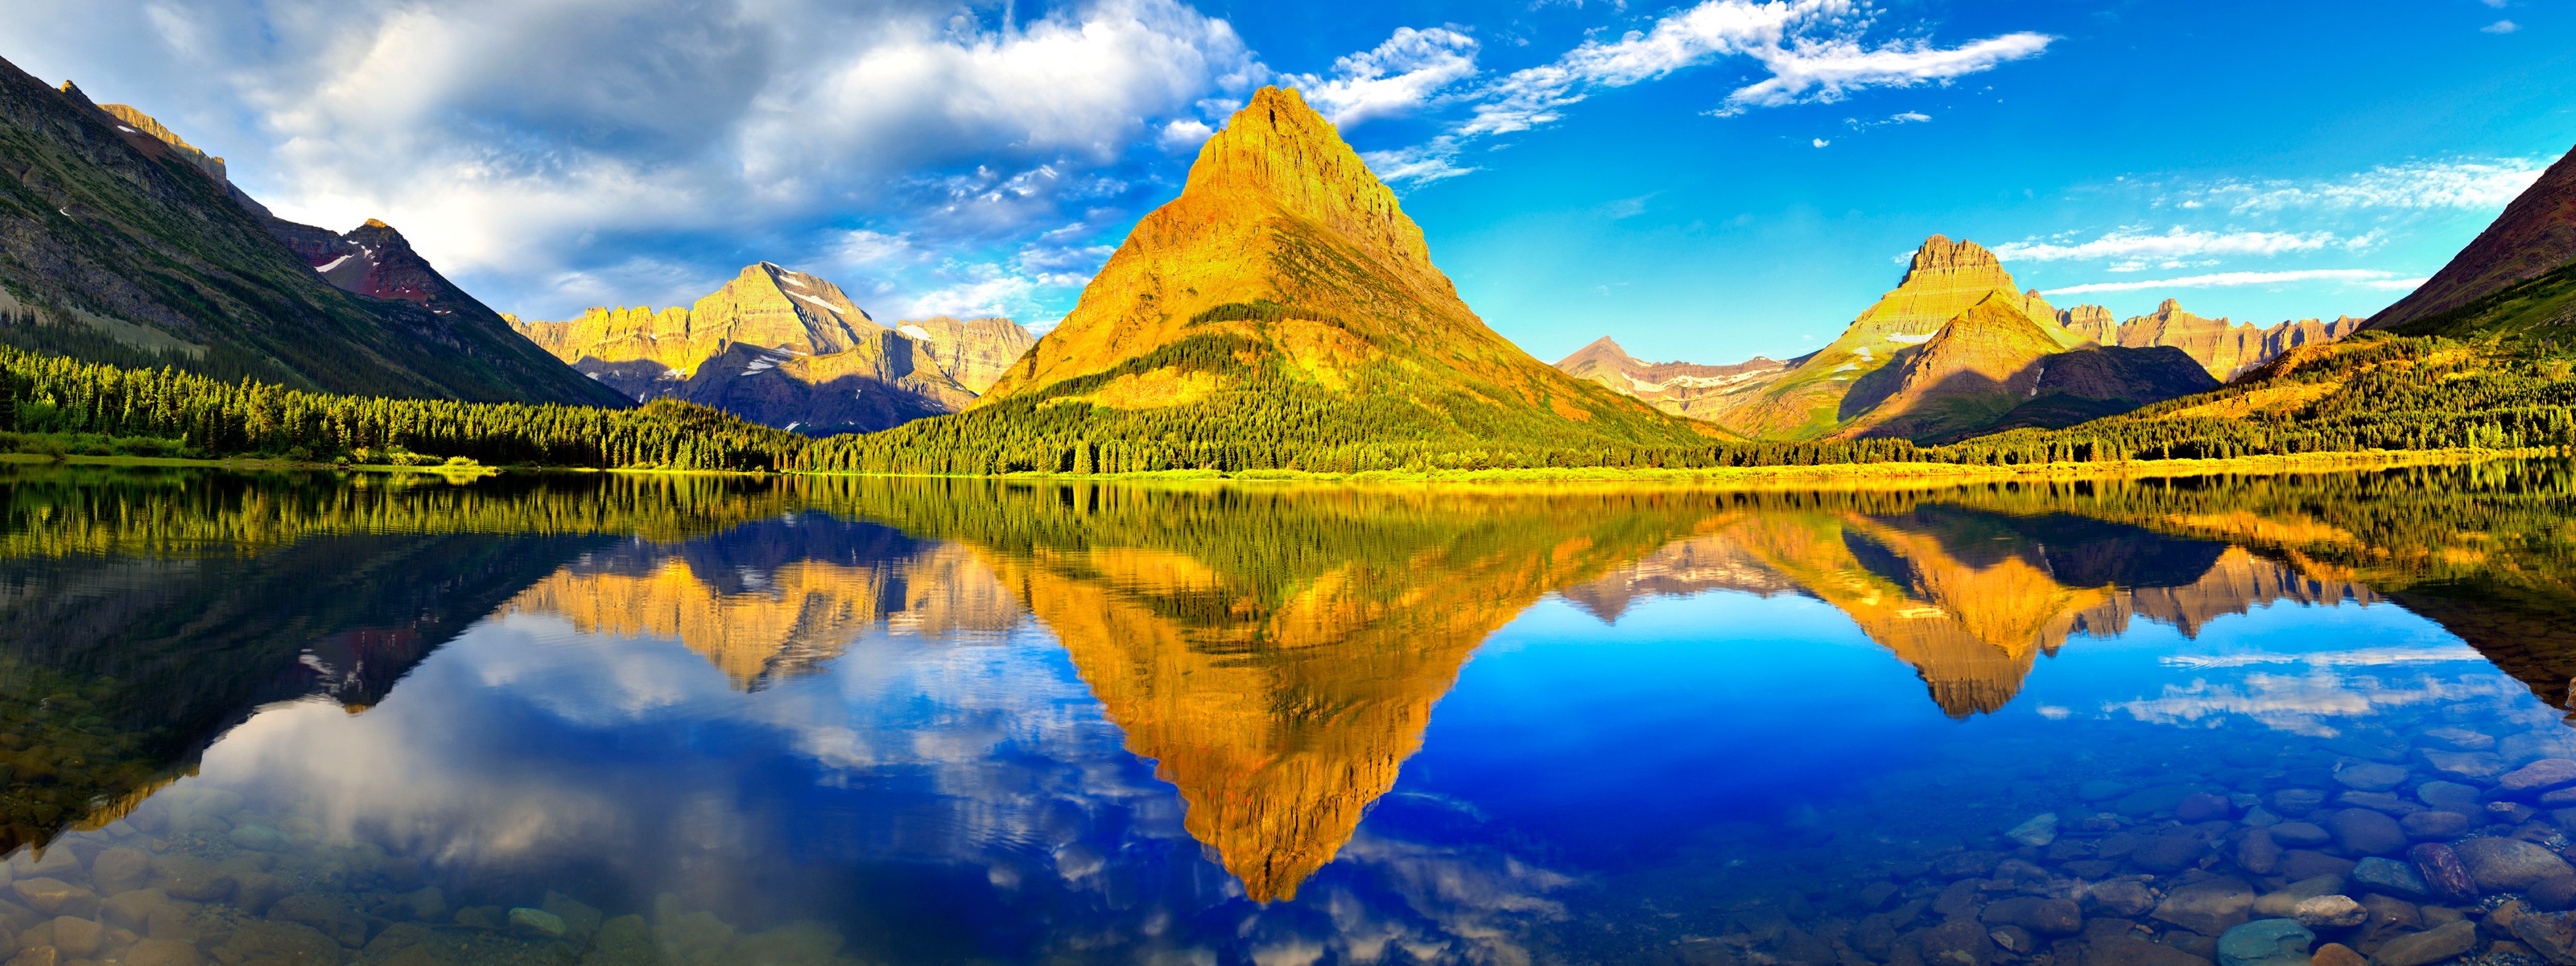 green, Mountains, Clouds, Trees, Peaks, Panorama, Lakes, Reflections Wallpaper